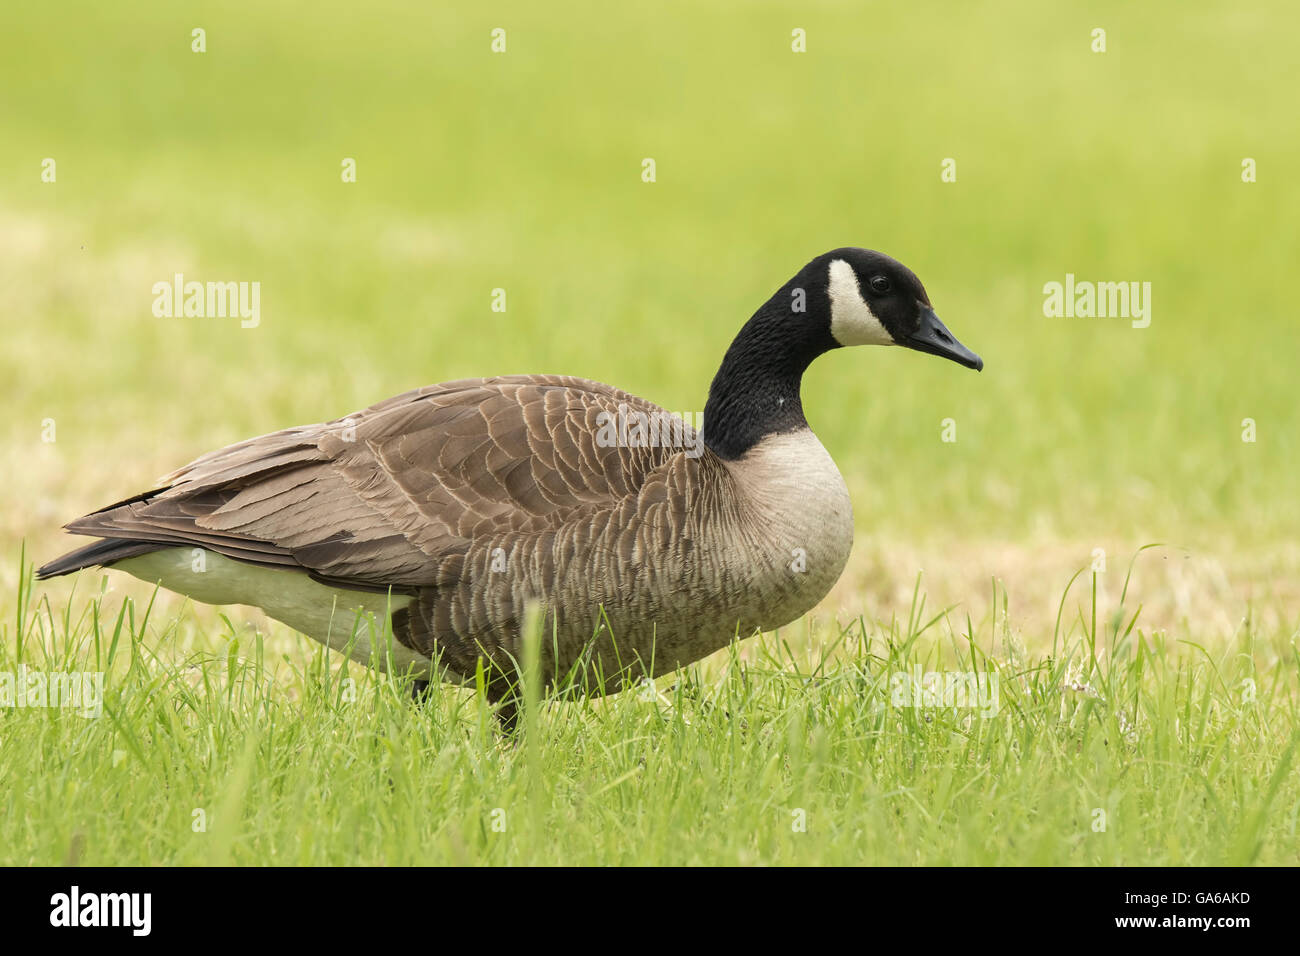 Close-up of a Canada goose (Branta canadensis) walking in a meadow Stock Photo